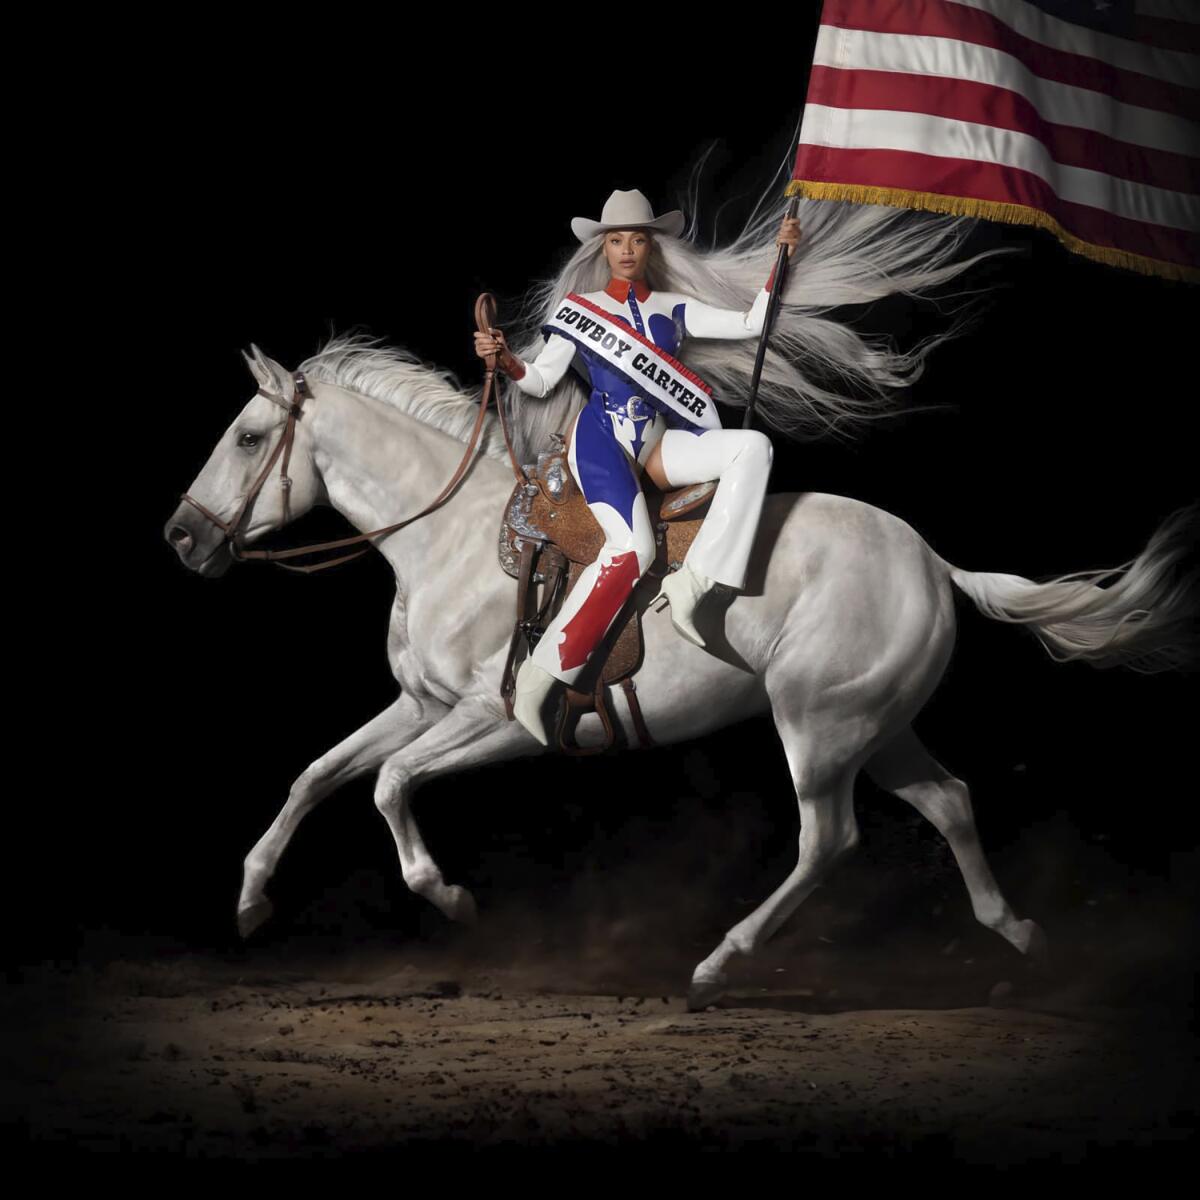 Beyoncé in red-white-and-blue rodeo garb riding a horse sidesaddle and holding an American flag for 'Cowboy Carter' album art